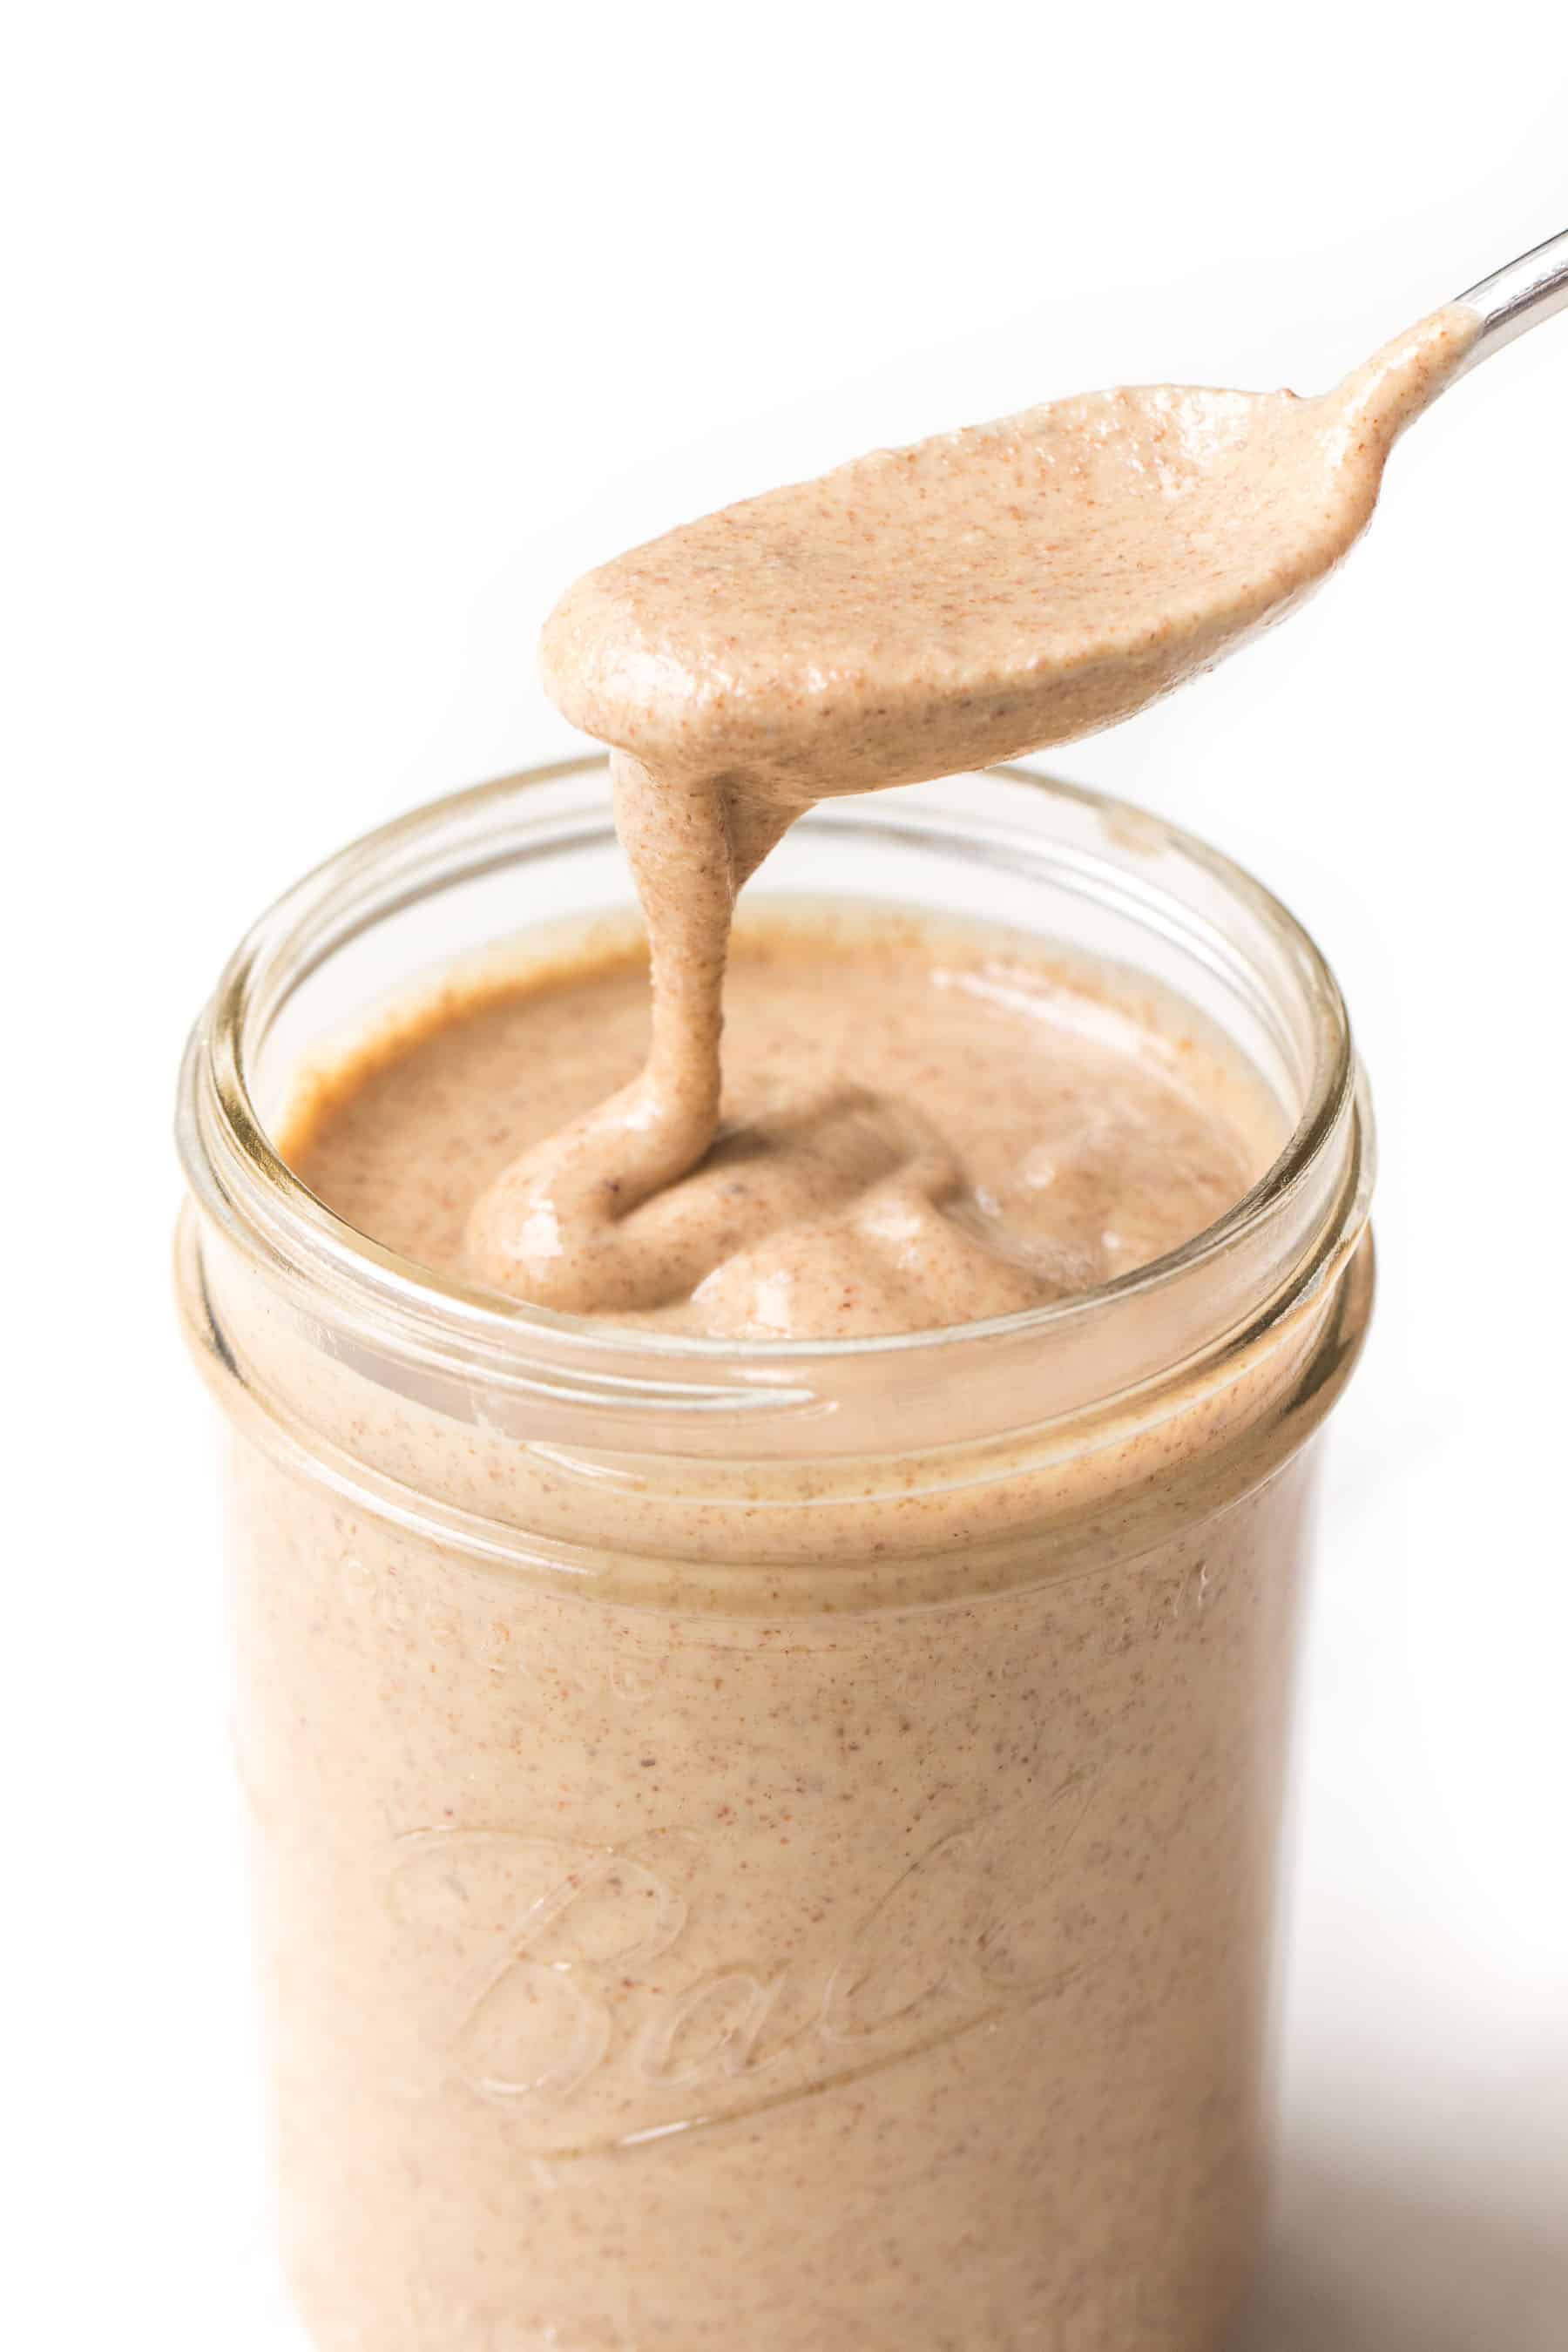 Spoon pouring homemade almond butter into a mason jar on a white background